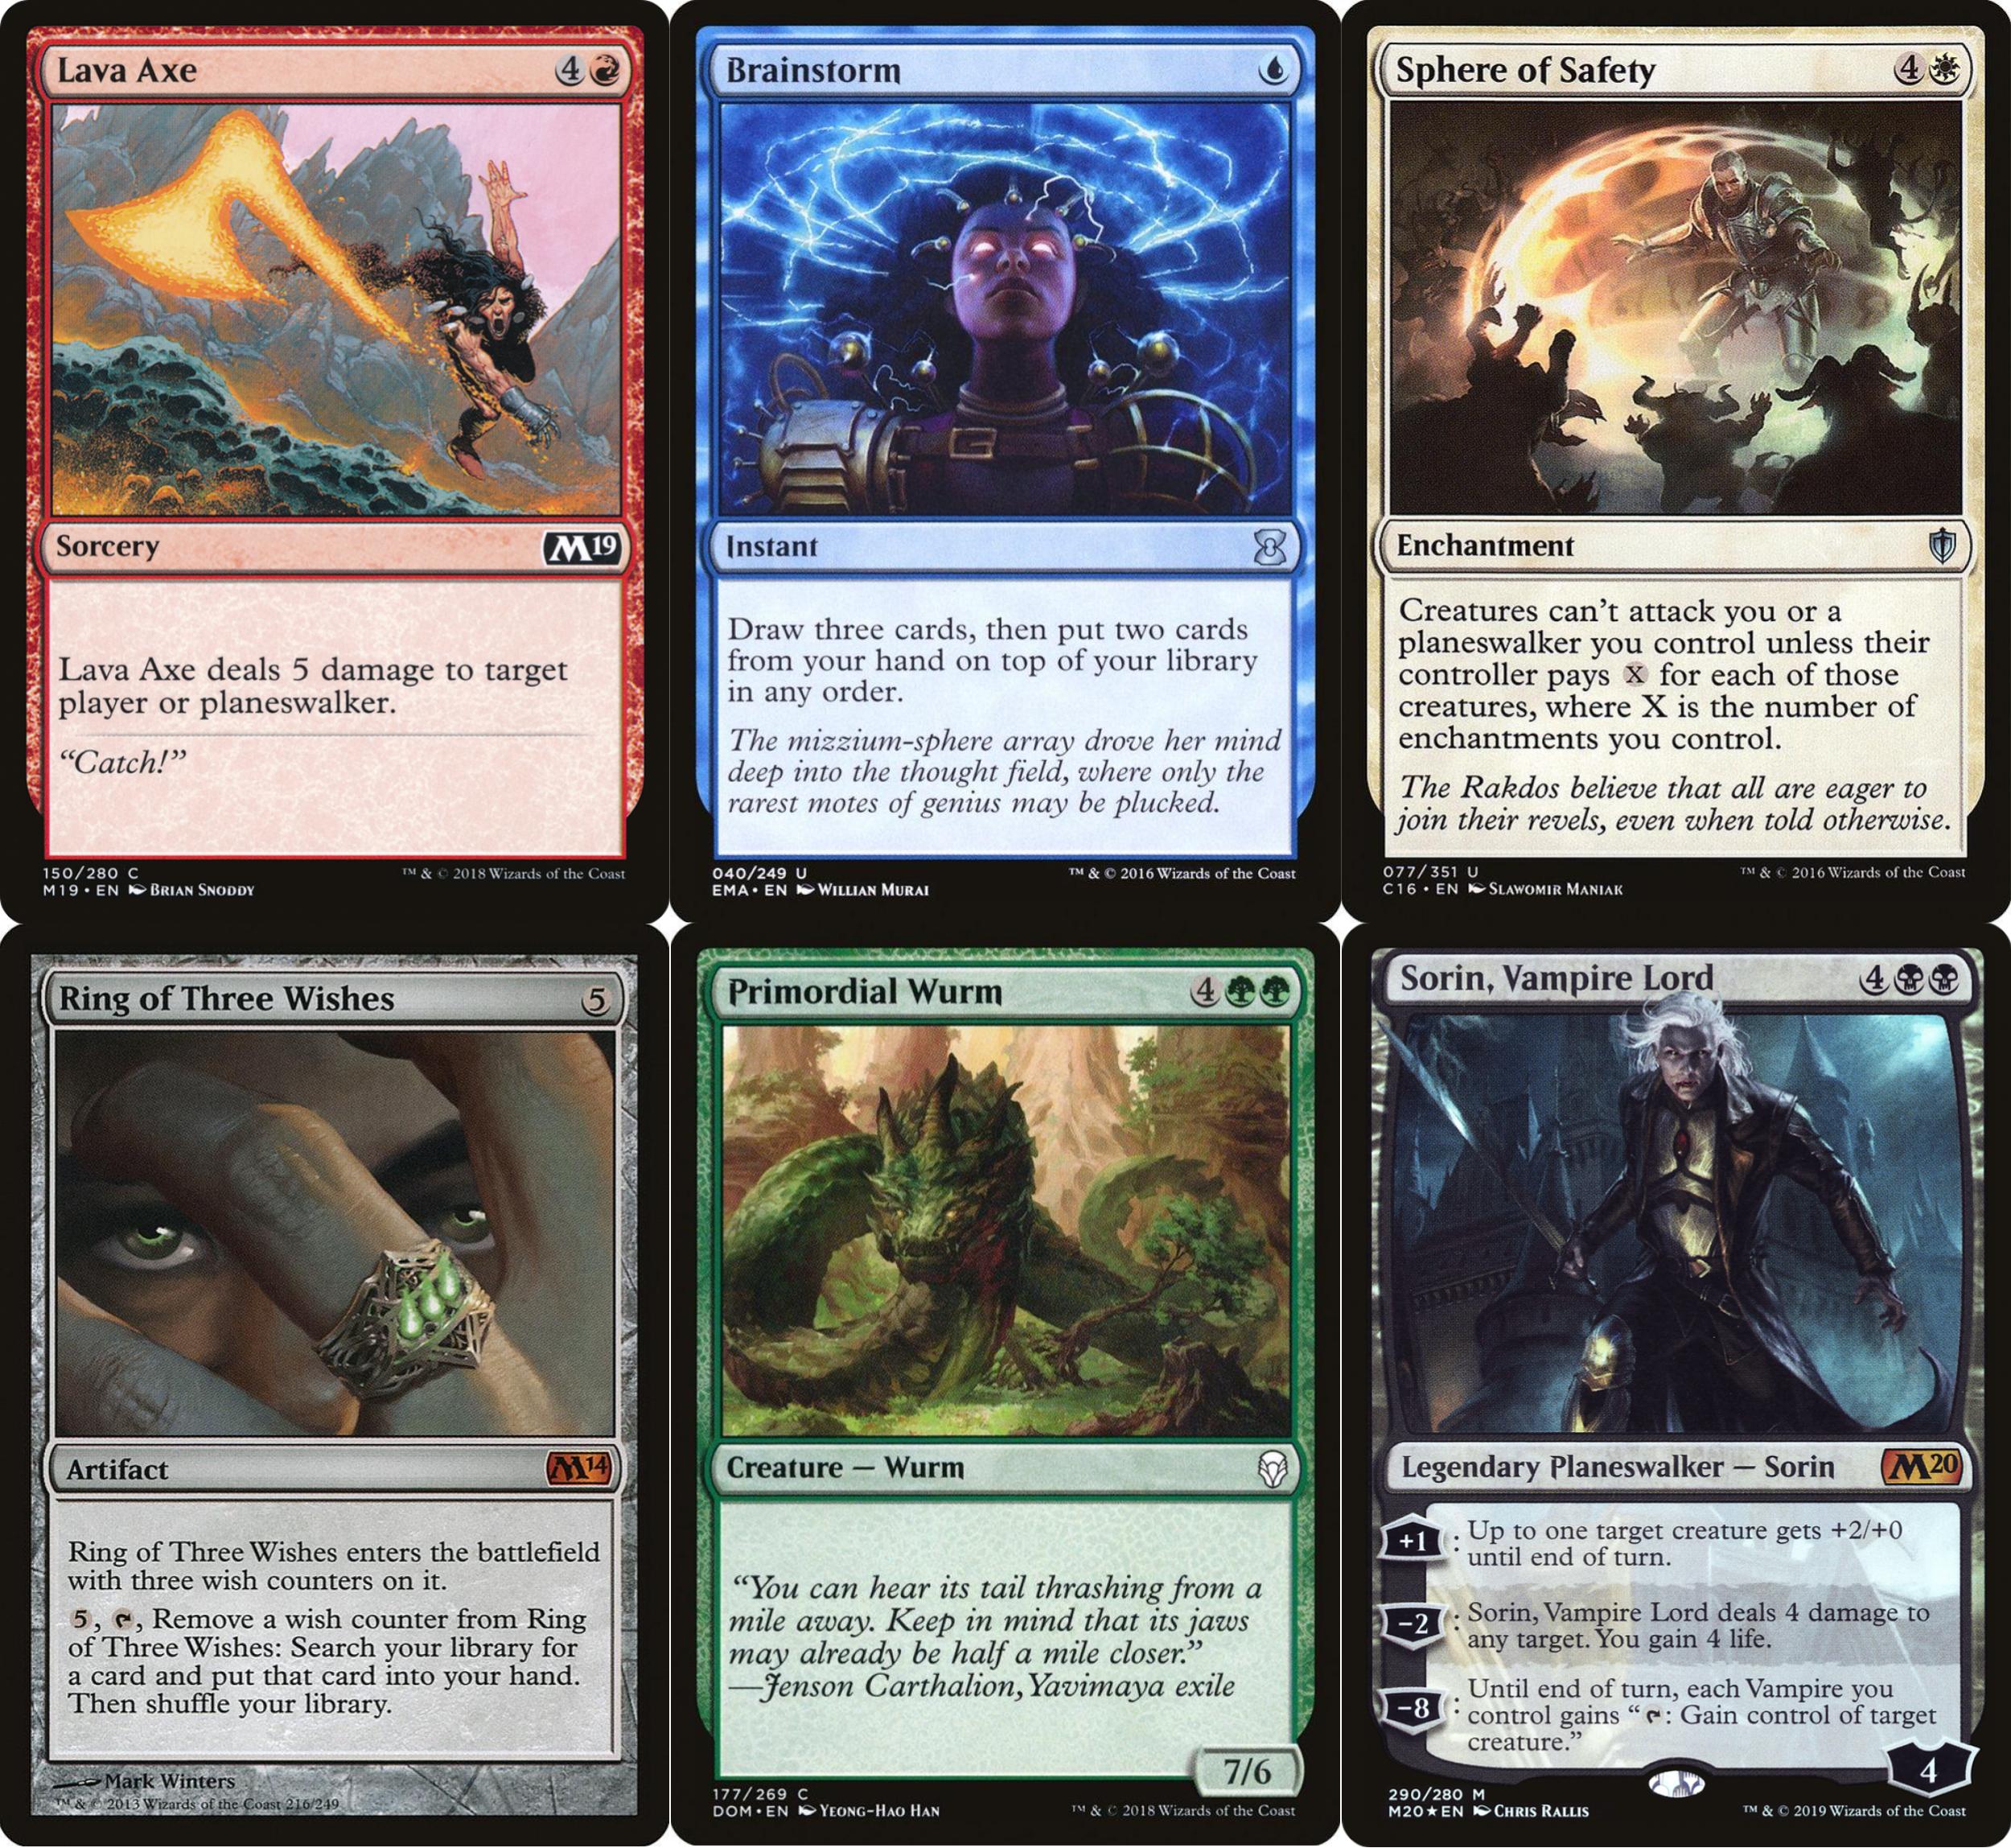 The Magic: the Gathering cards Lava Axe, Brainstorm, Sphere of Safety, Ring of Three Wishes, Primordial Worm, and Sorin, Vampire Lord